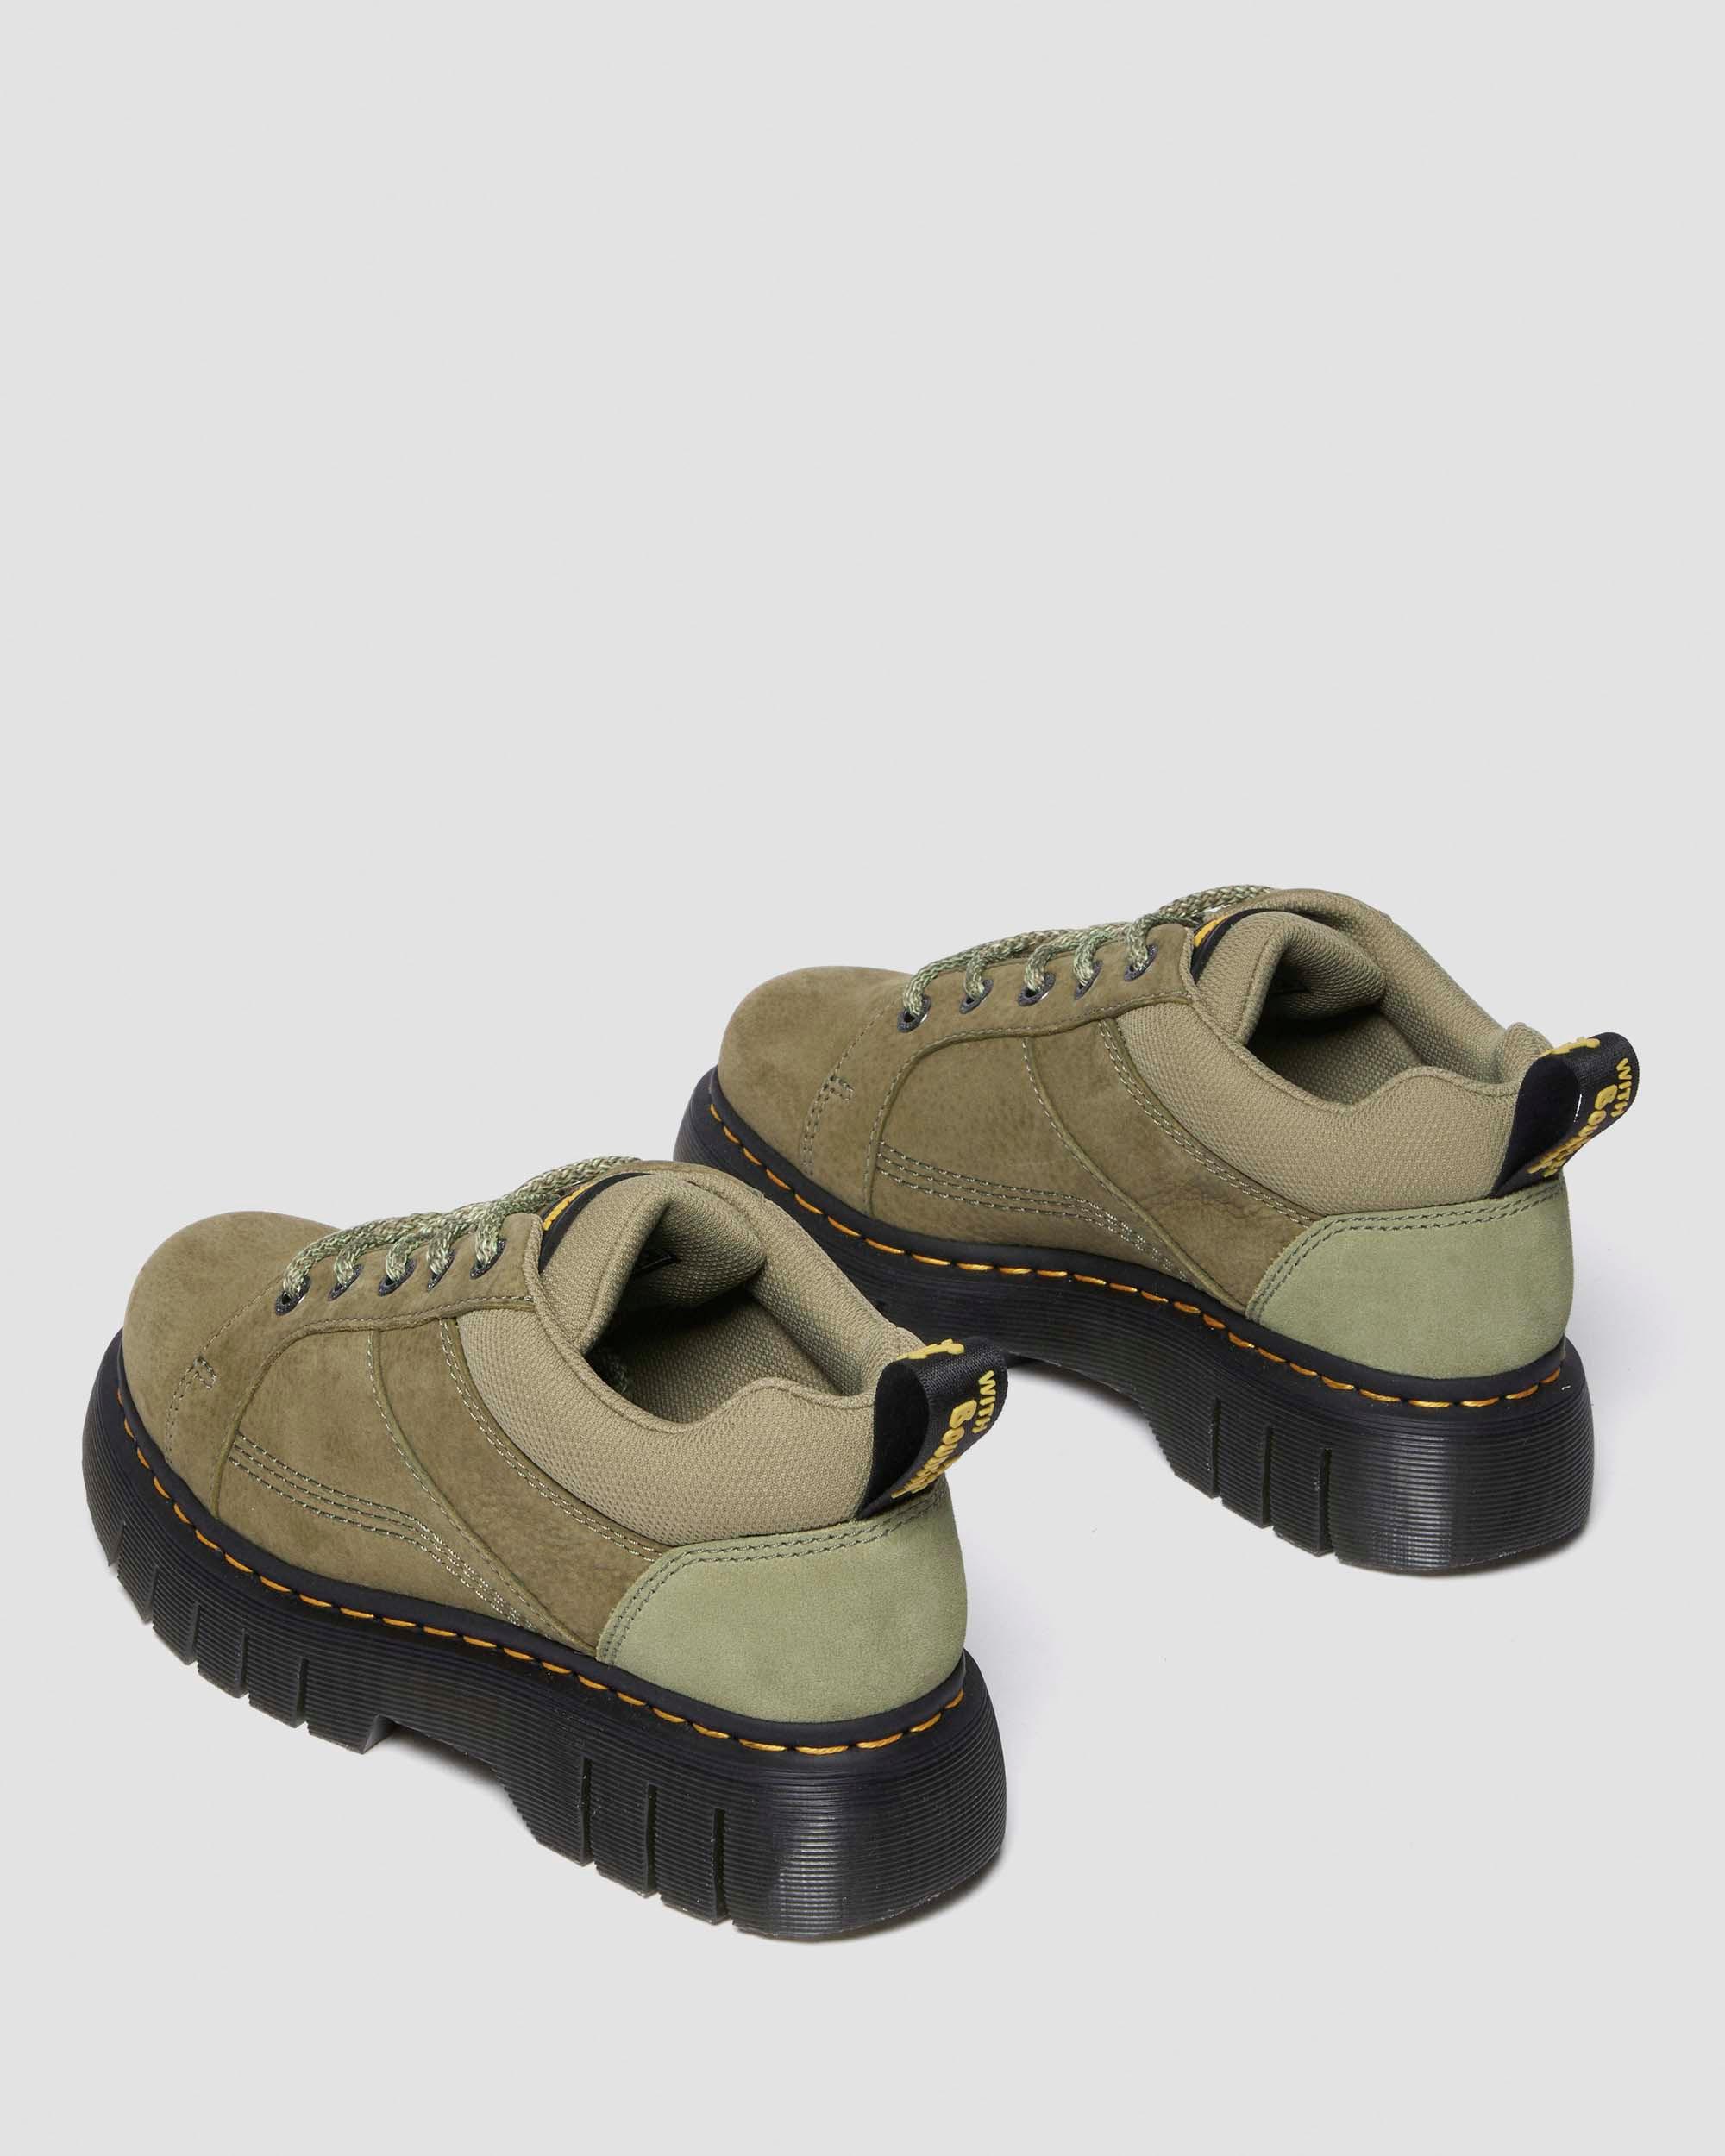 Woodard Tumbled Nubuck Leather Zip Shoes in Muted Olive